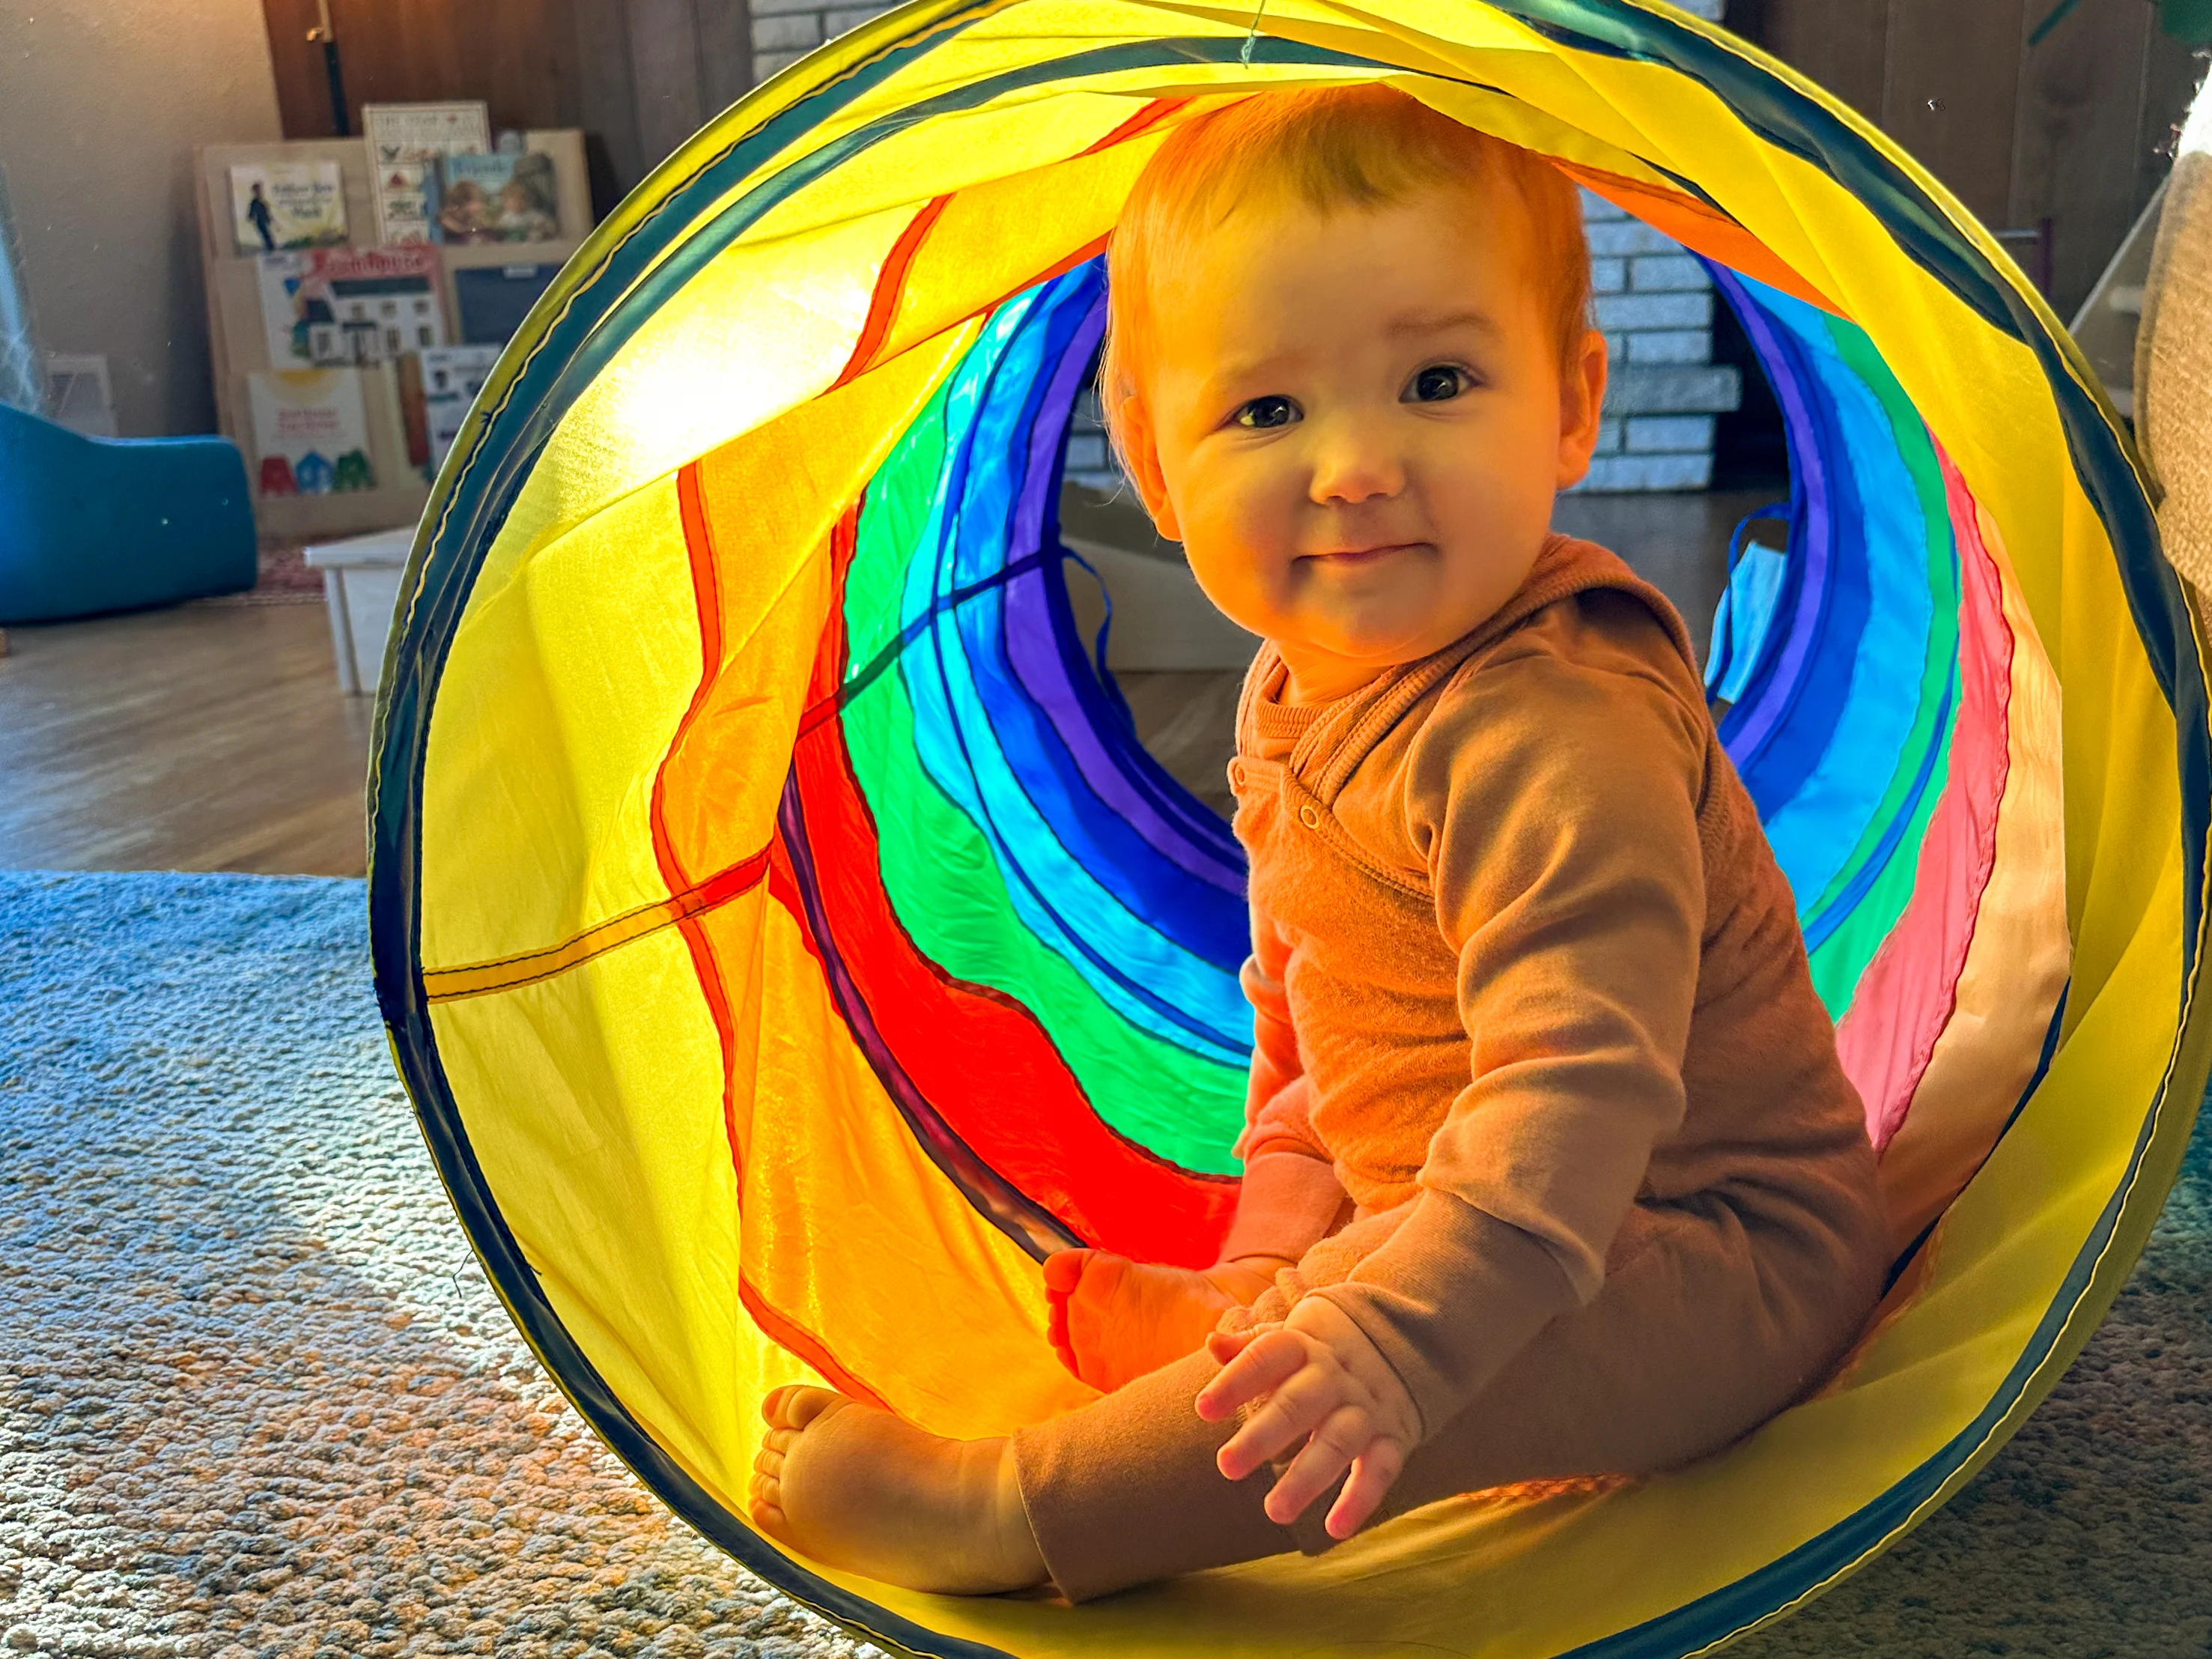 Baby sits in play tunnel in Montessori home while smiling.